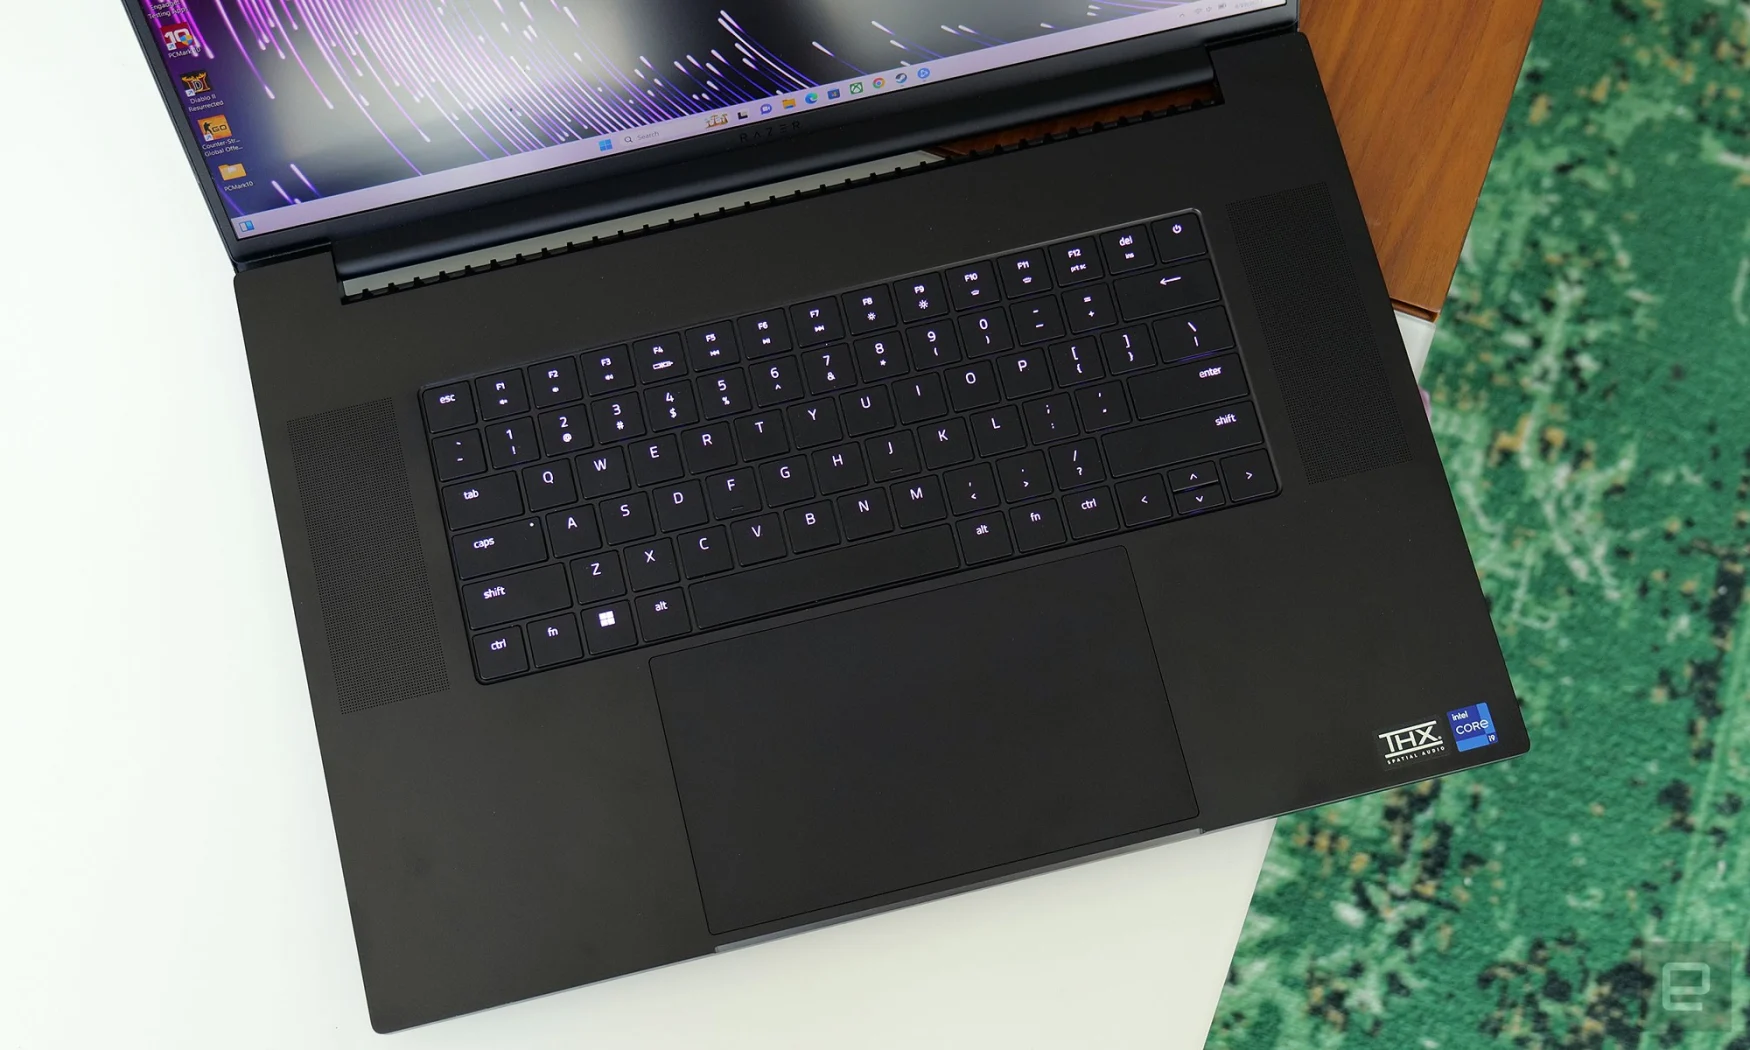 The Blade 18 has a pretty standard keyboard layout along with per-key RGB backlighting. 